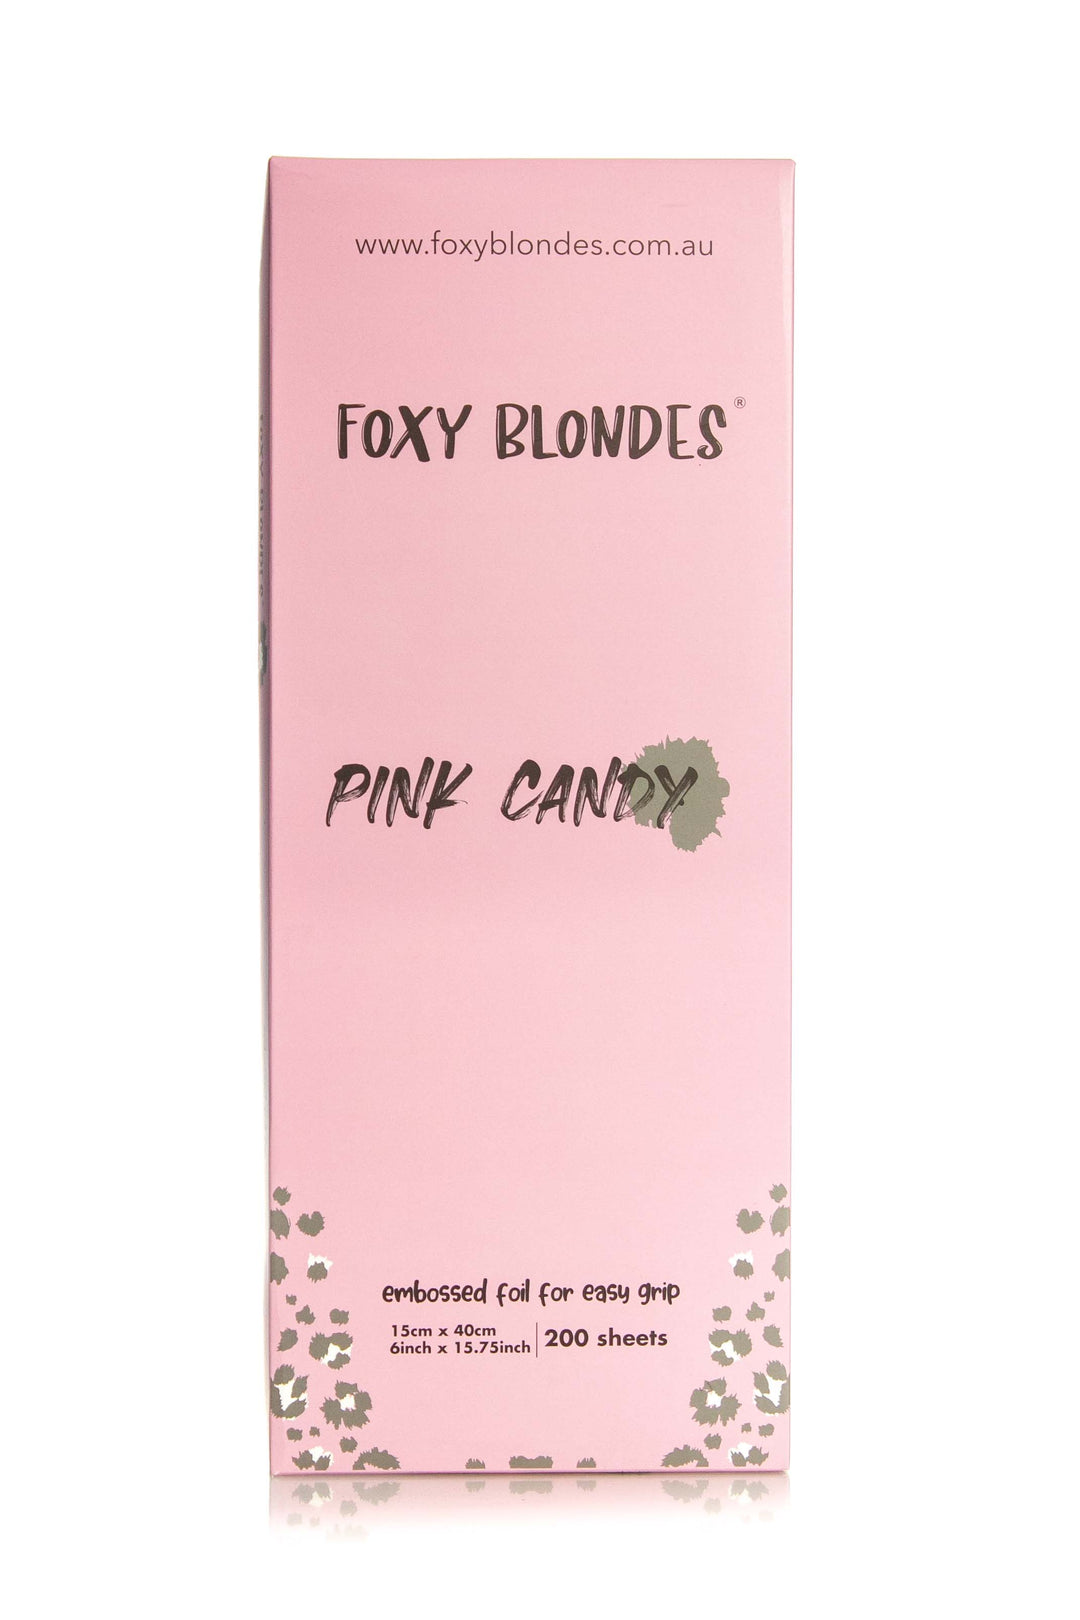 FOXY BLONDES PINK CANDY EXTRA LONG 15X40CM 200 SHEETS